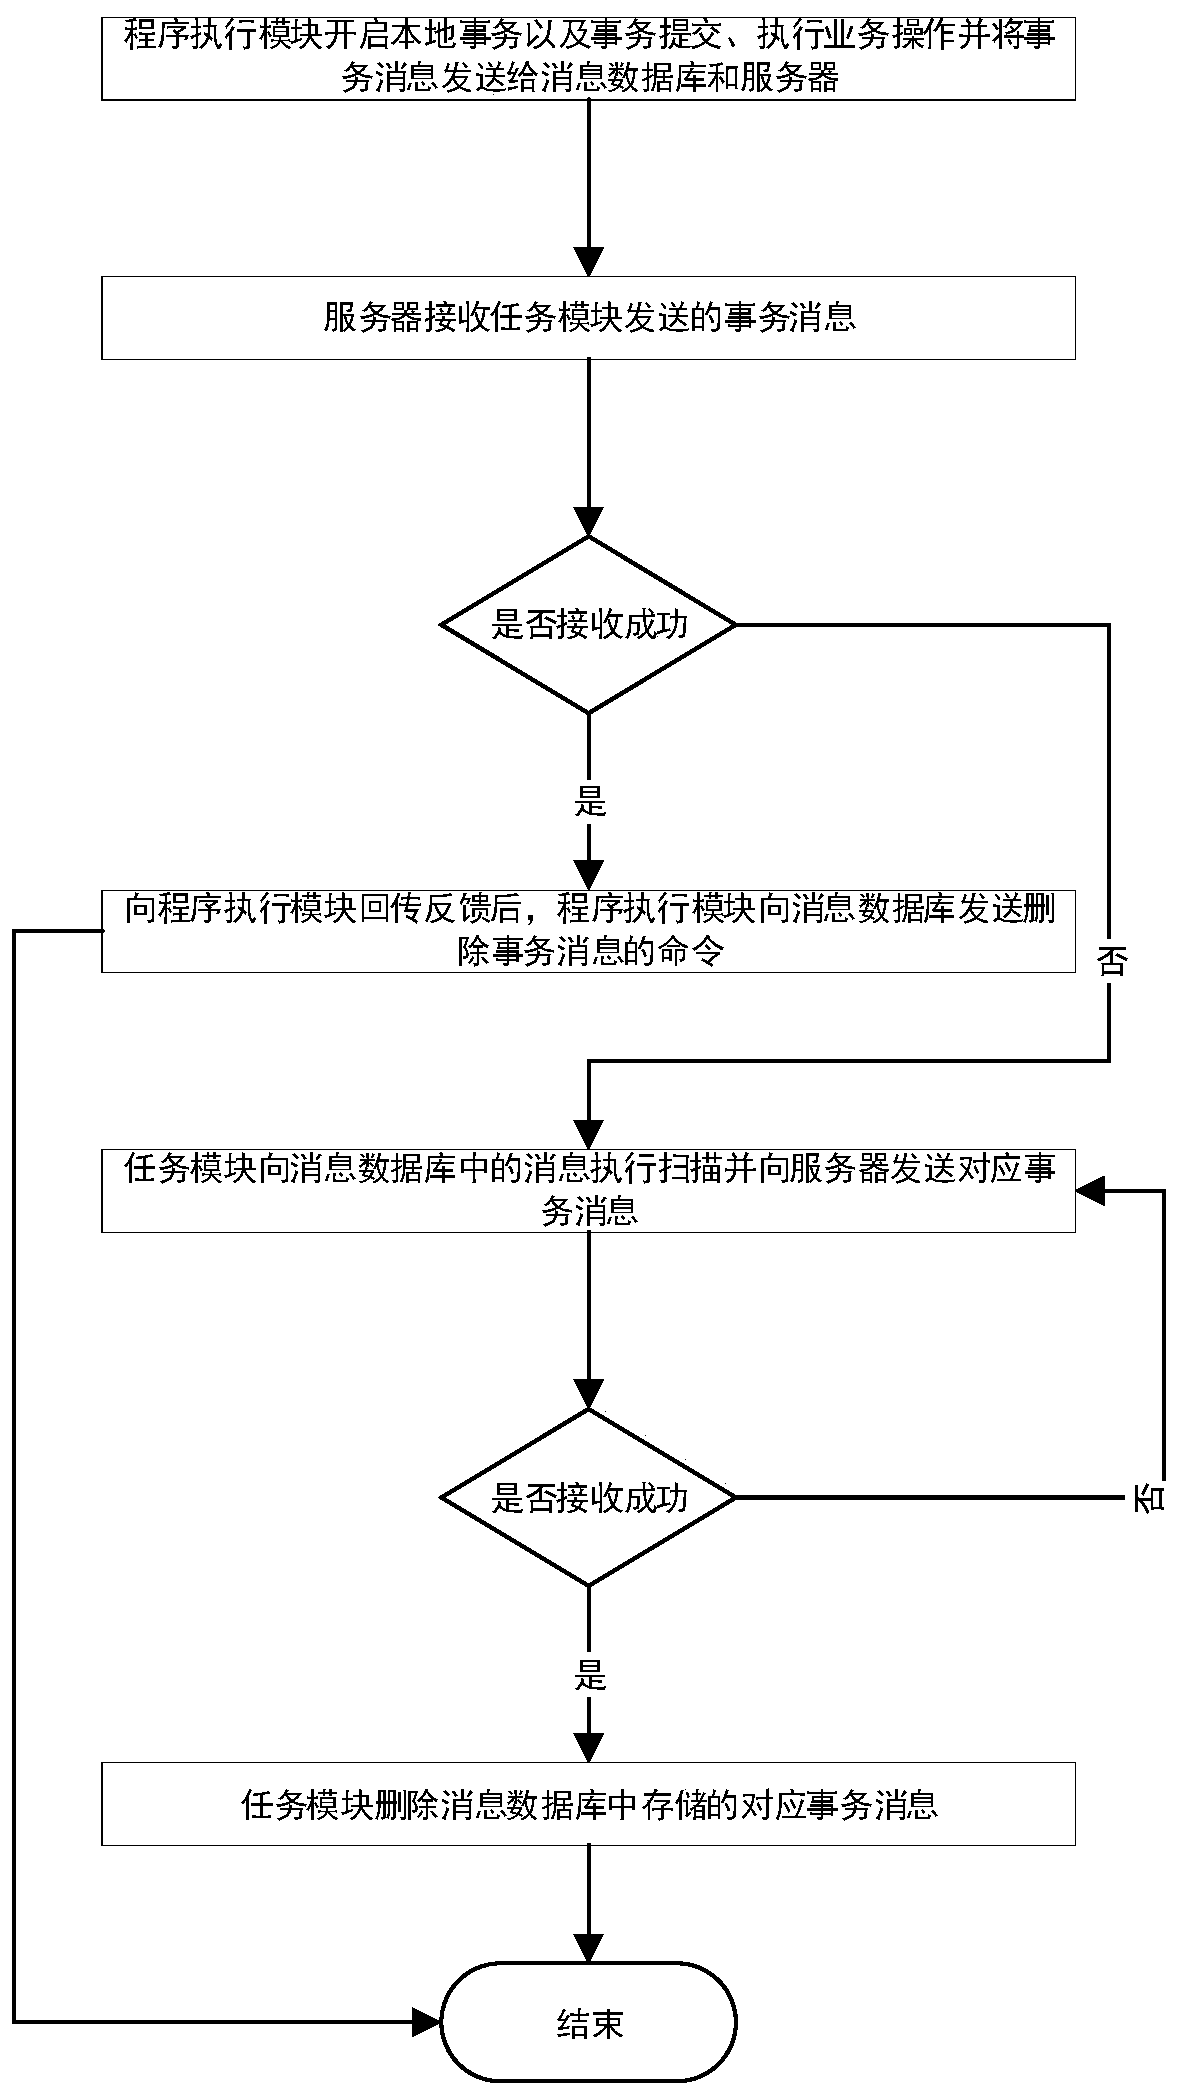 Message queue transceiving system and method